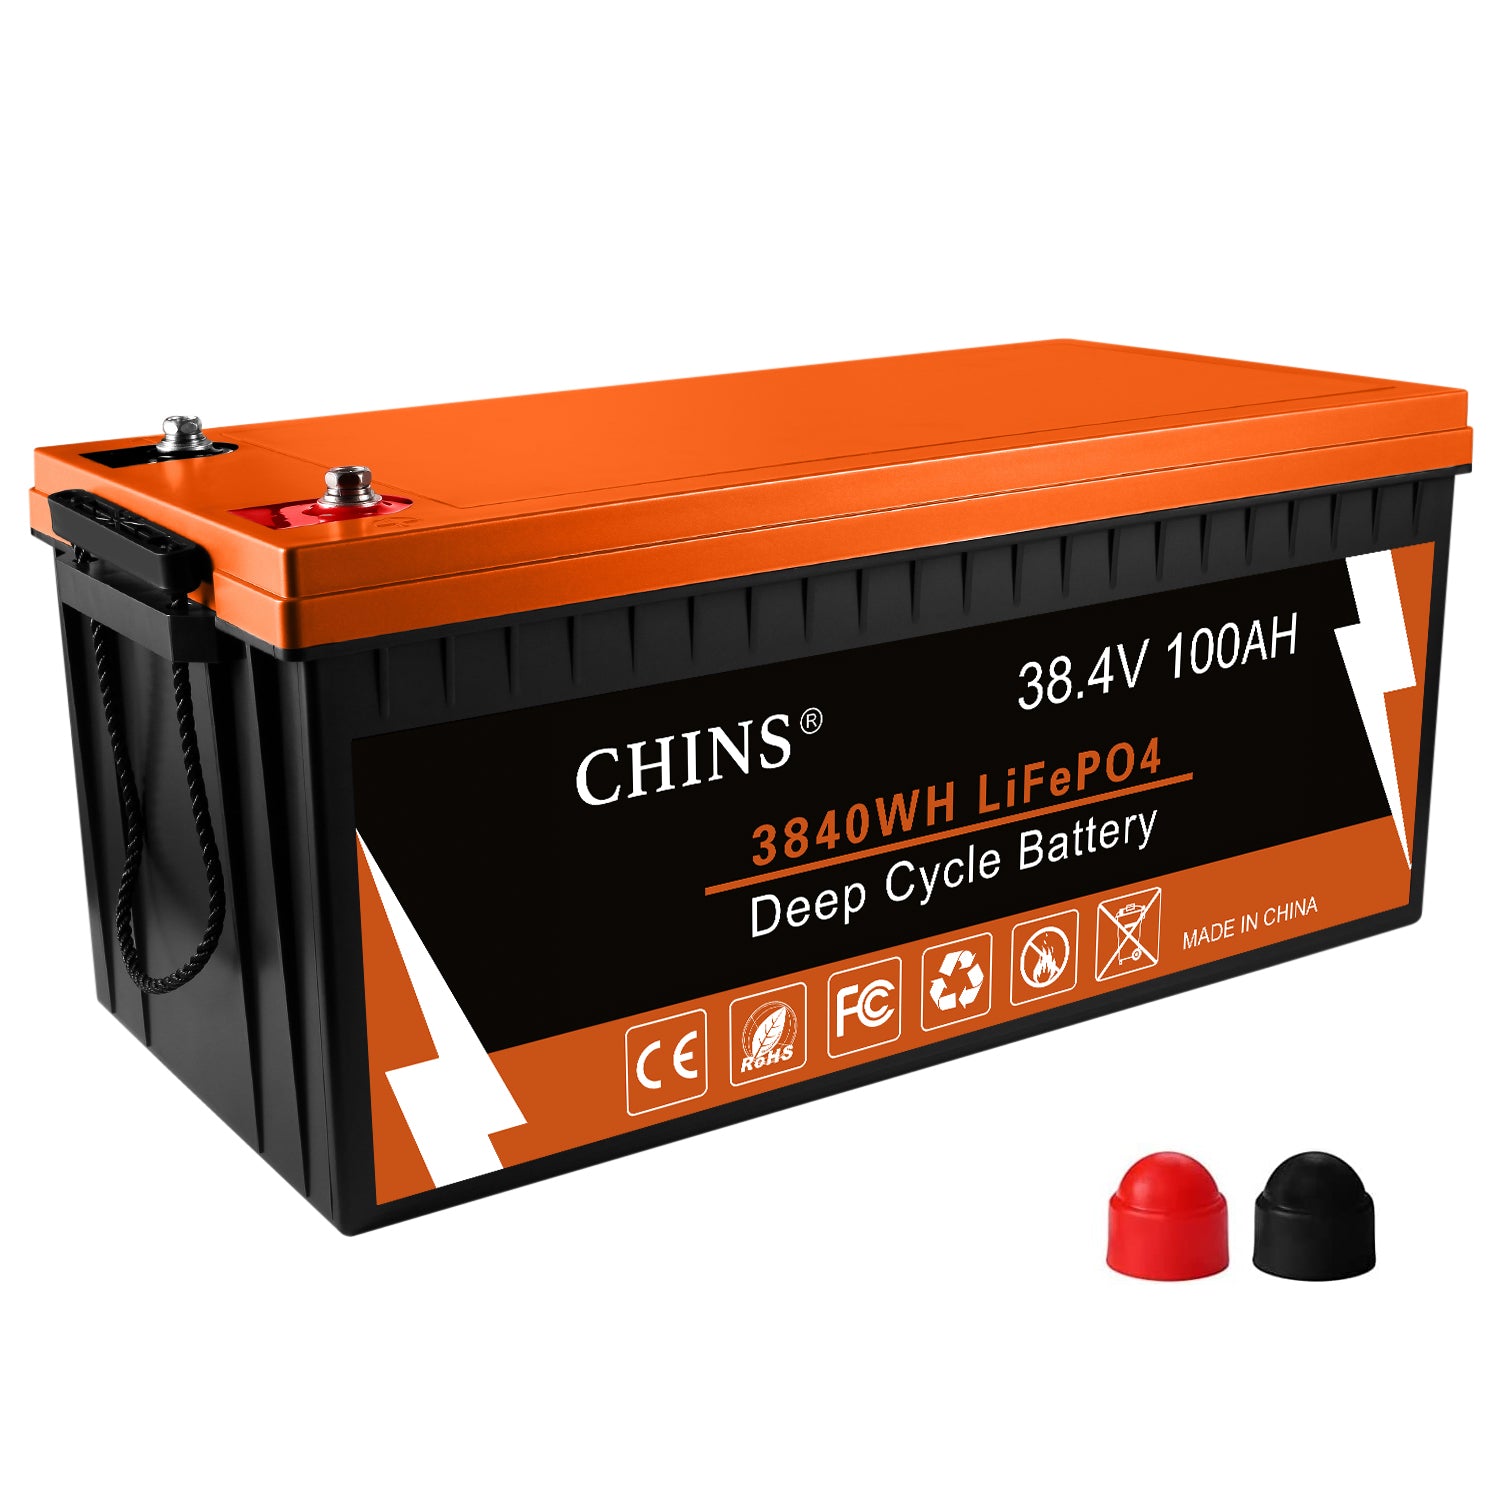 CHINS Bluetooth LiFePO4 Battery 36V 100AH Lithium Battery Perfect for –  CHINS-Battery